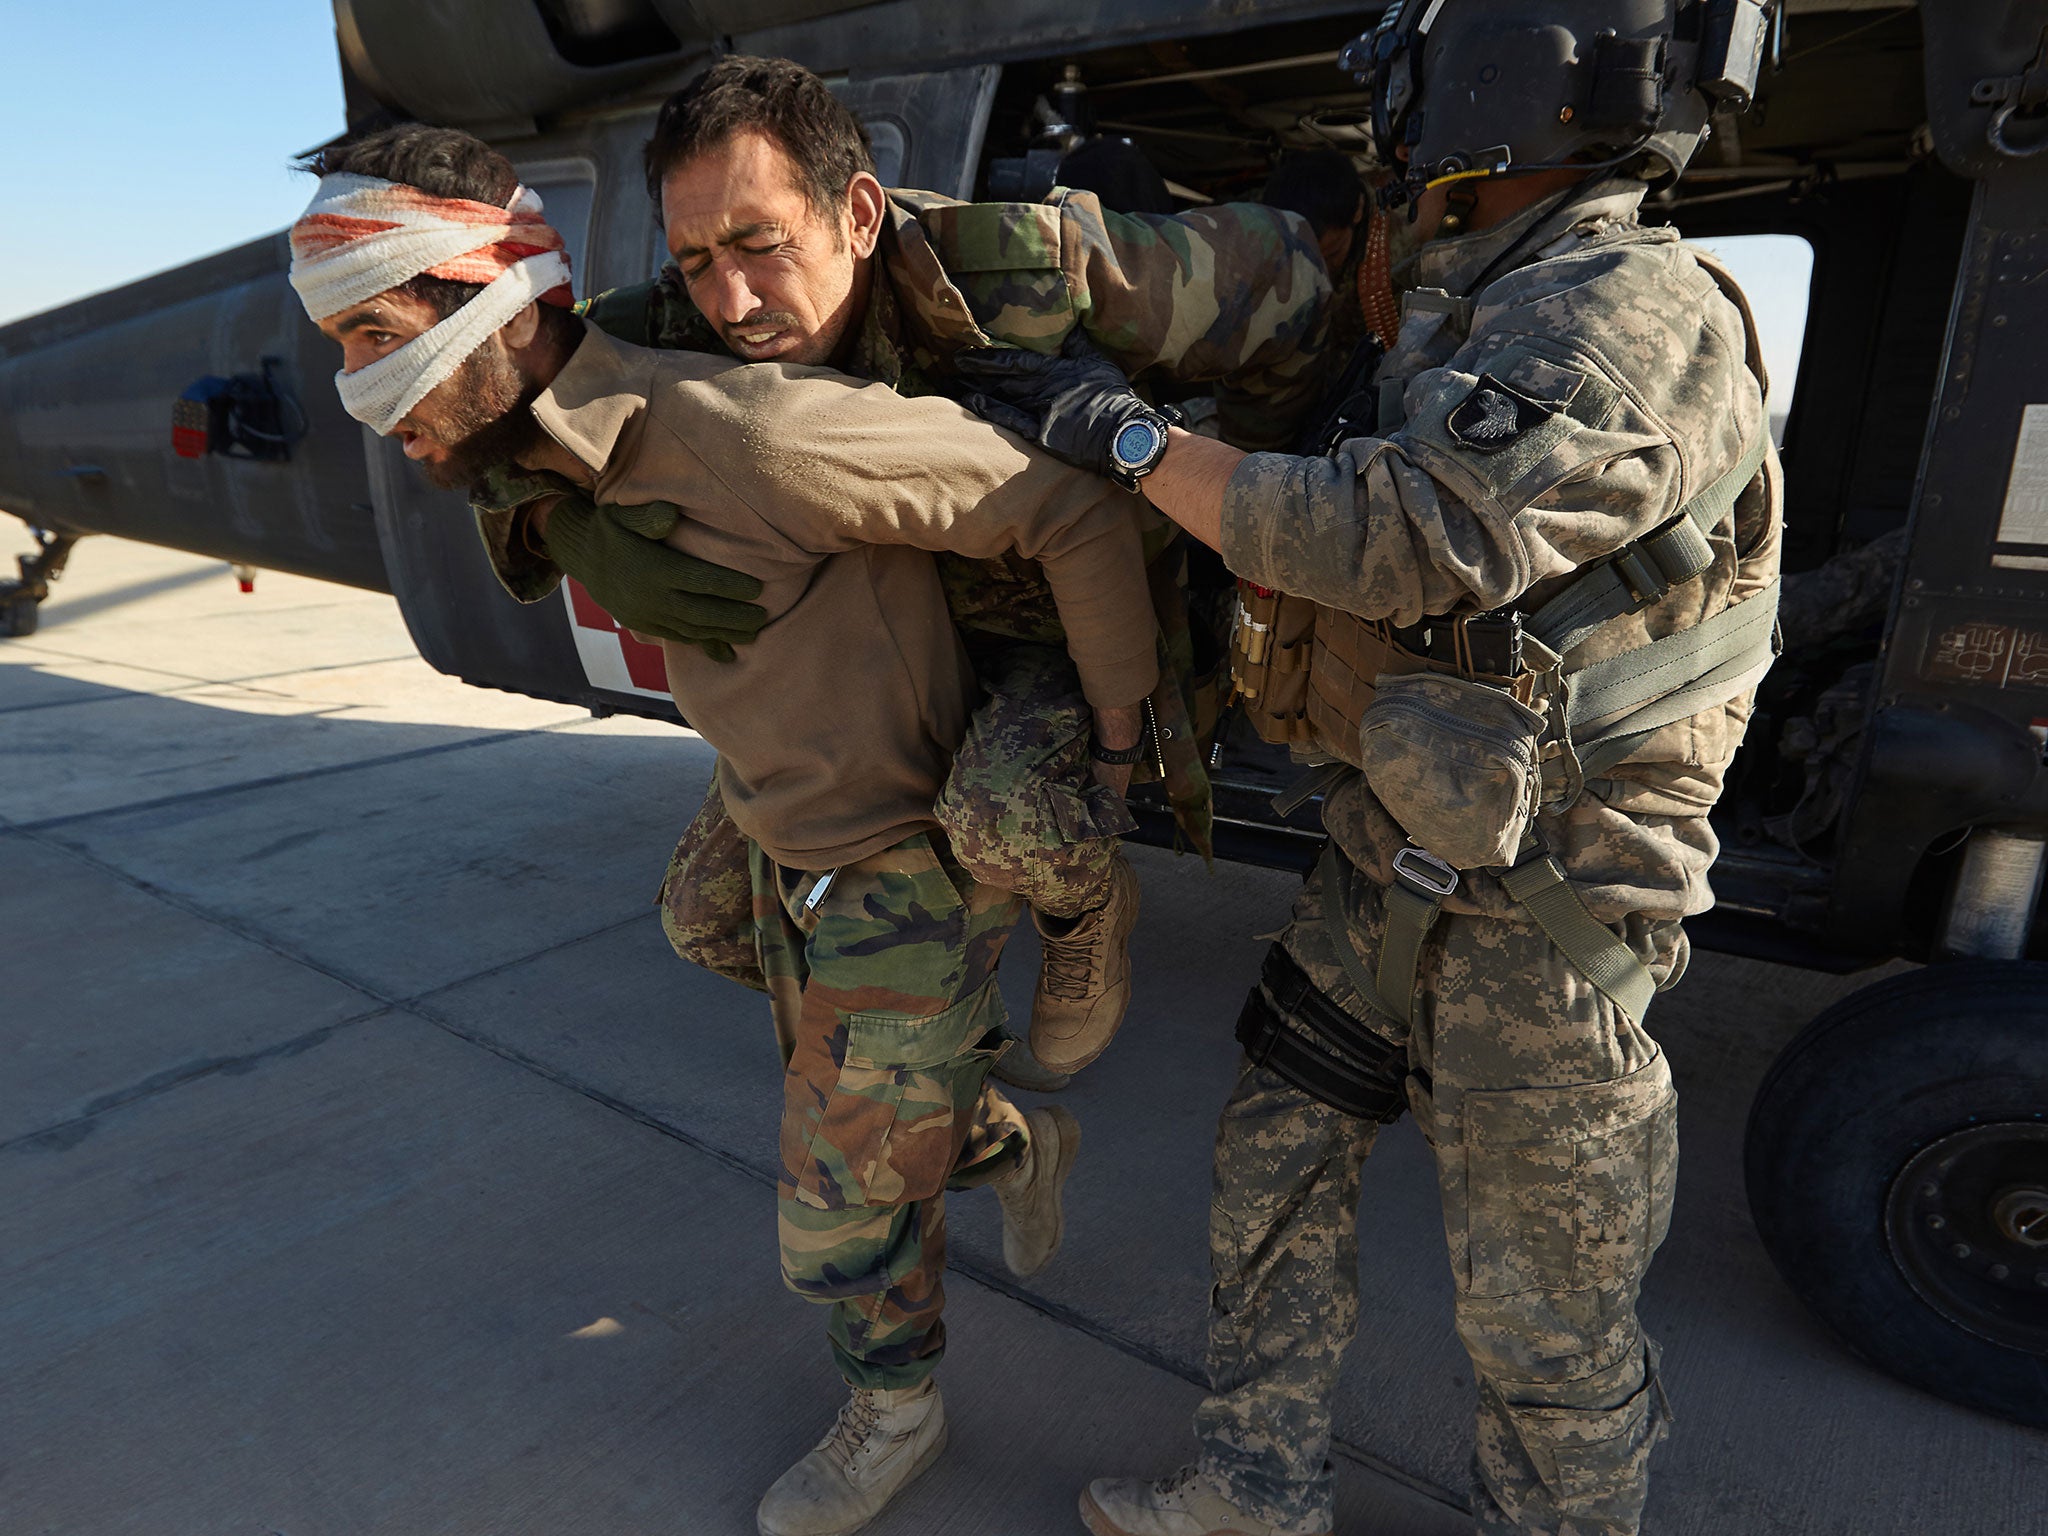 US Army Sargeant Jay Kenney (right), with Task Force Destiny, helps wounded Afghan National Army soldiers exit a Blackhawk helicopter after they have been rescued in an air mission. (Kandahar, December 12, 2010)